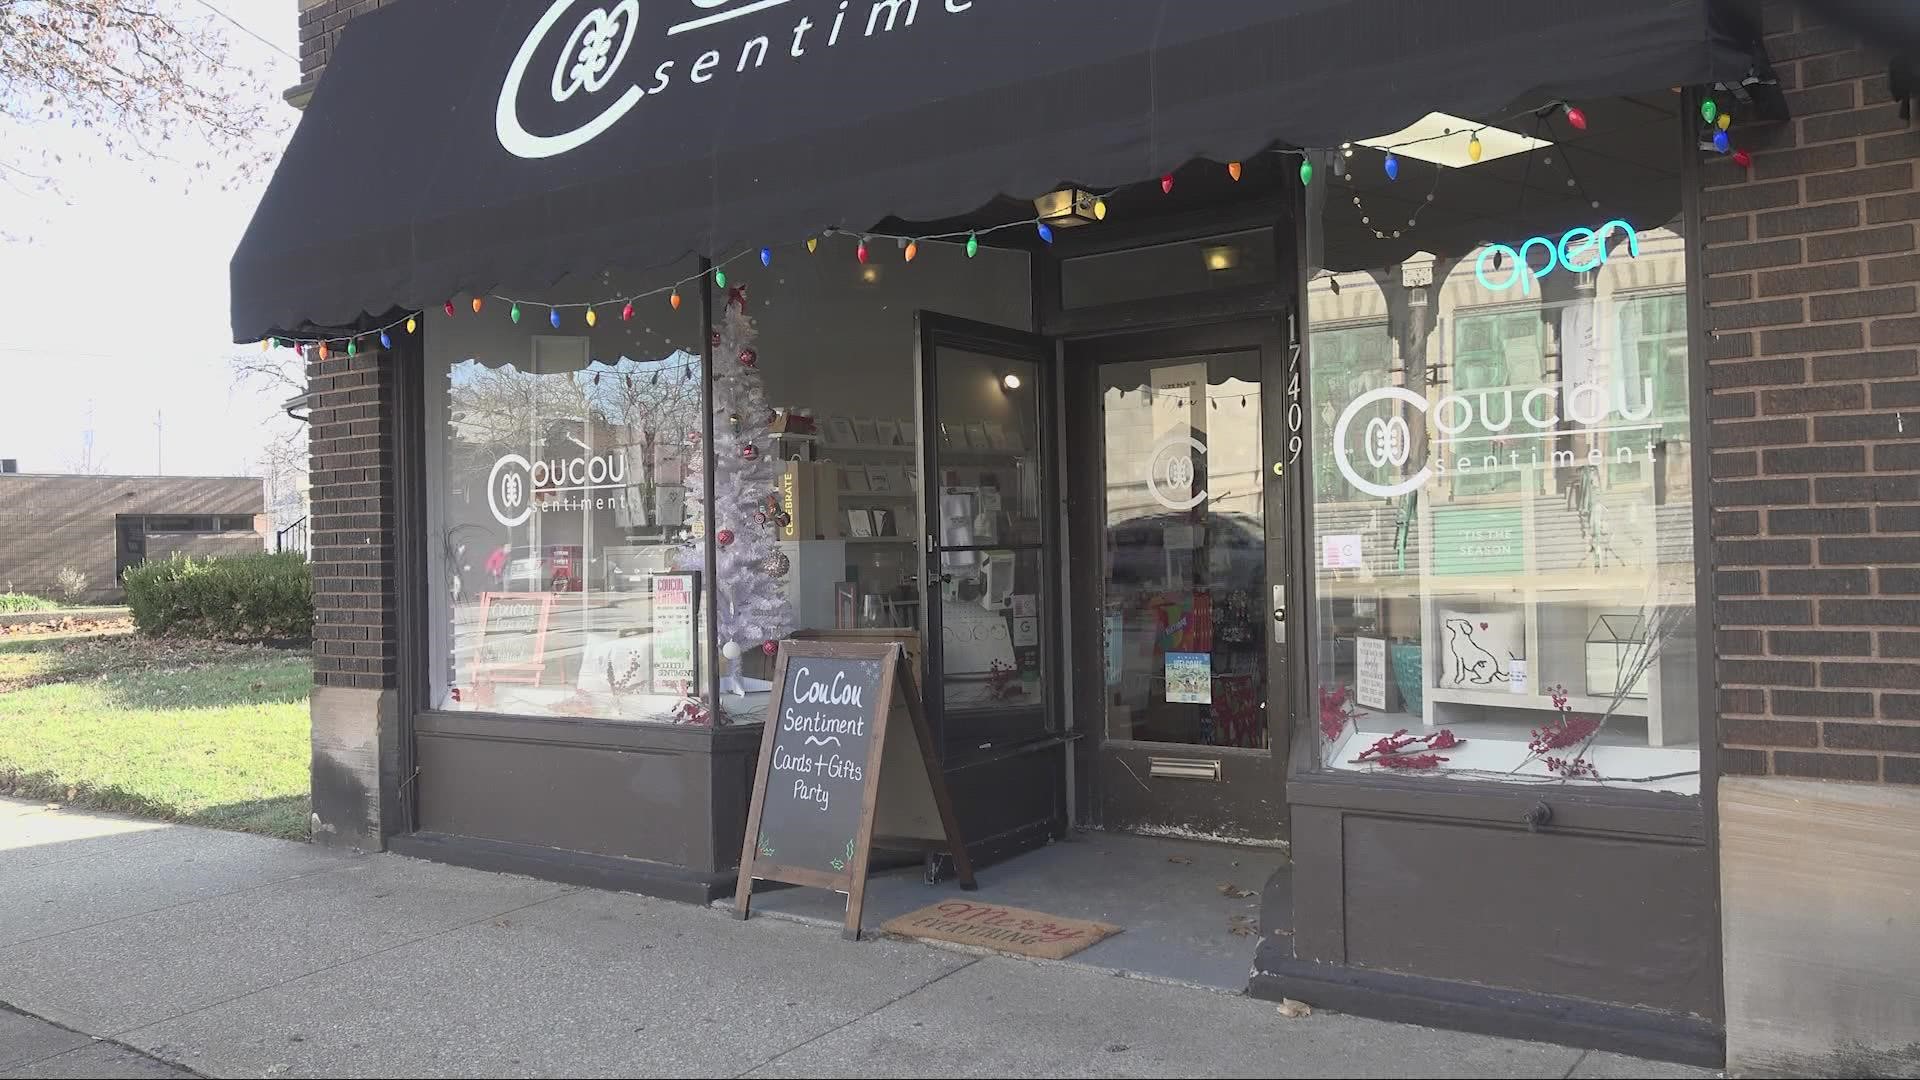 About a dozen businesses in Lakewood are teaming up for Small Business Saturday.